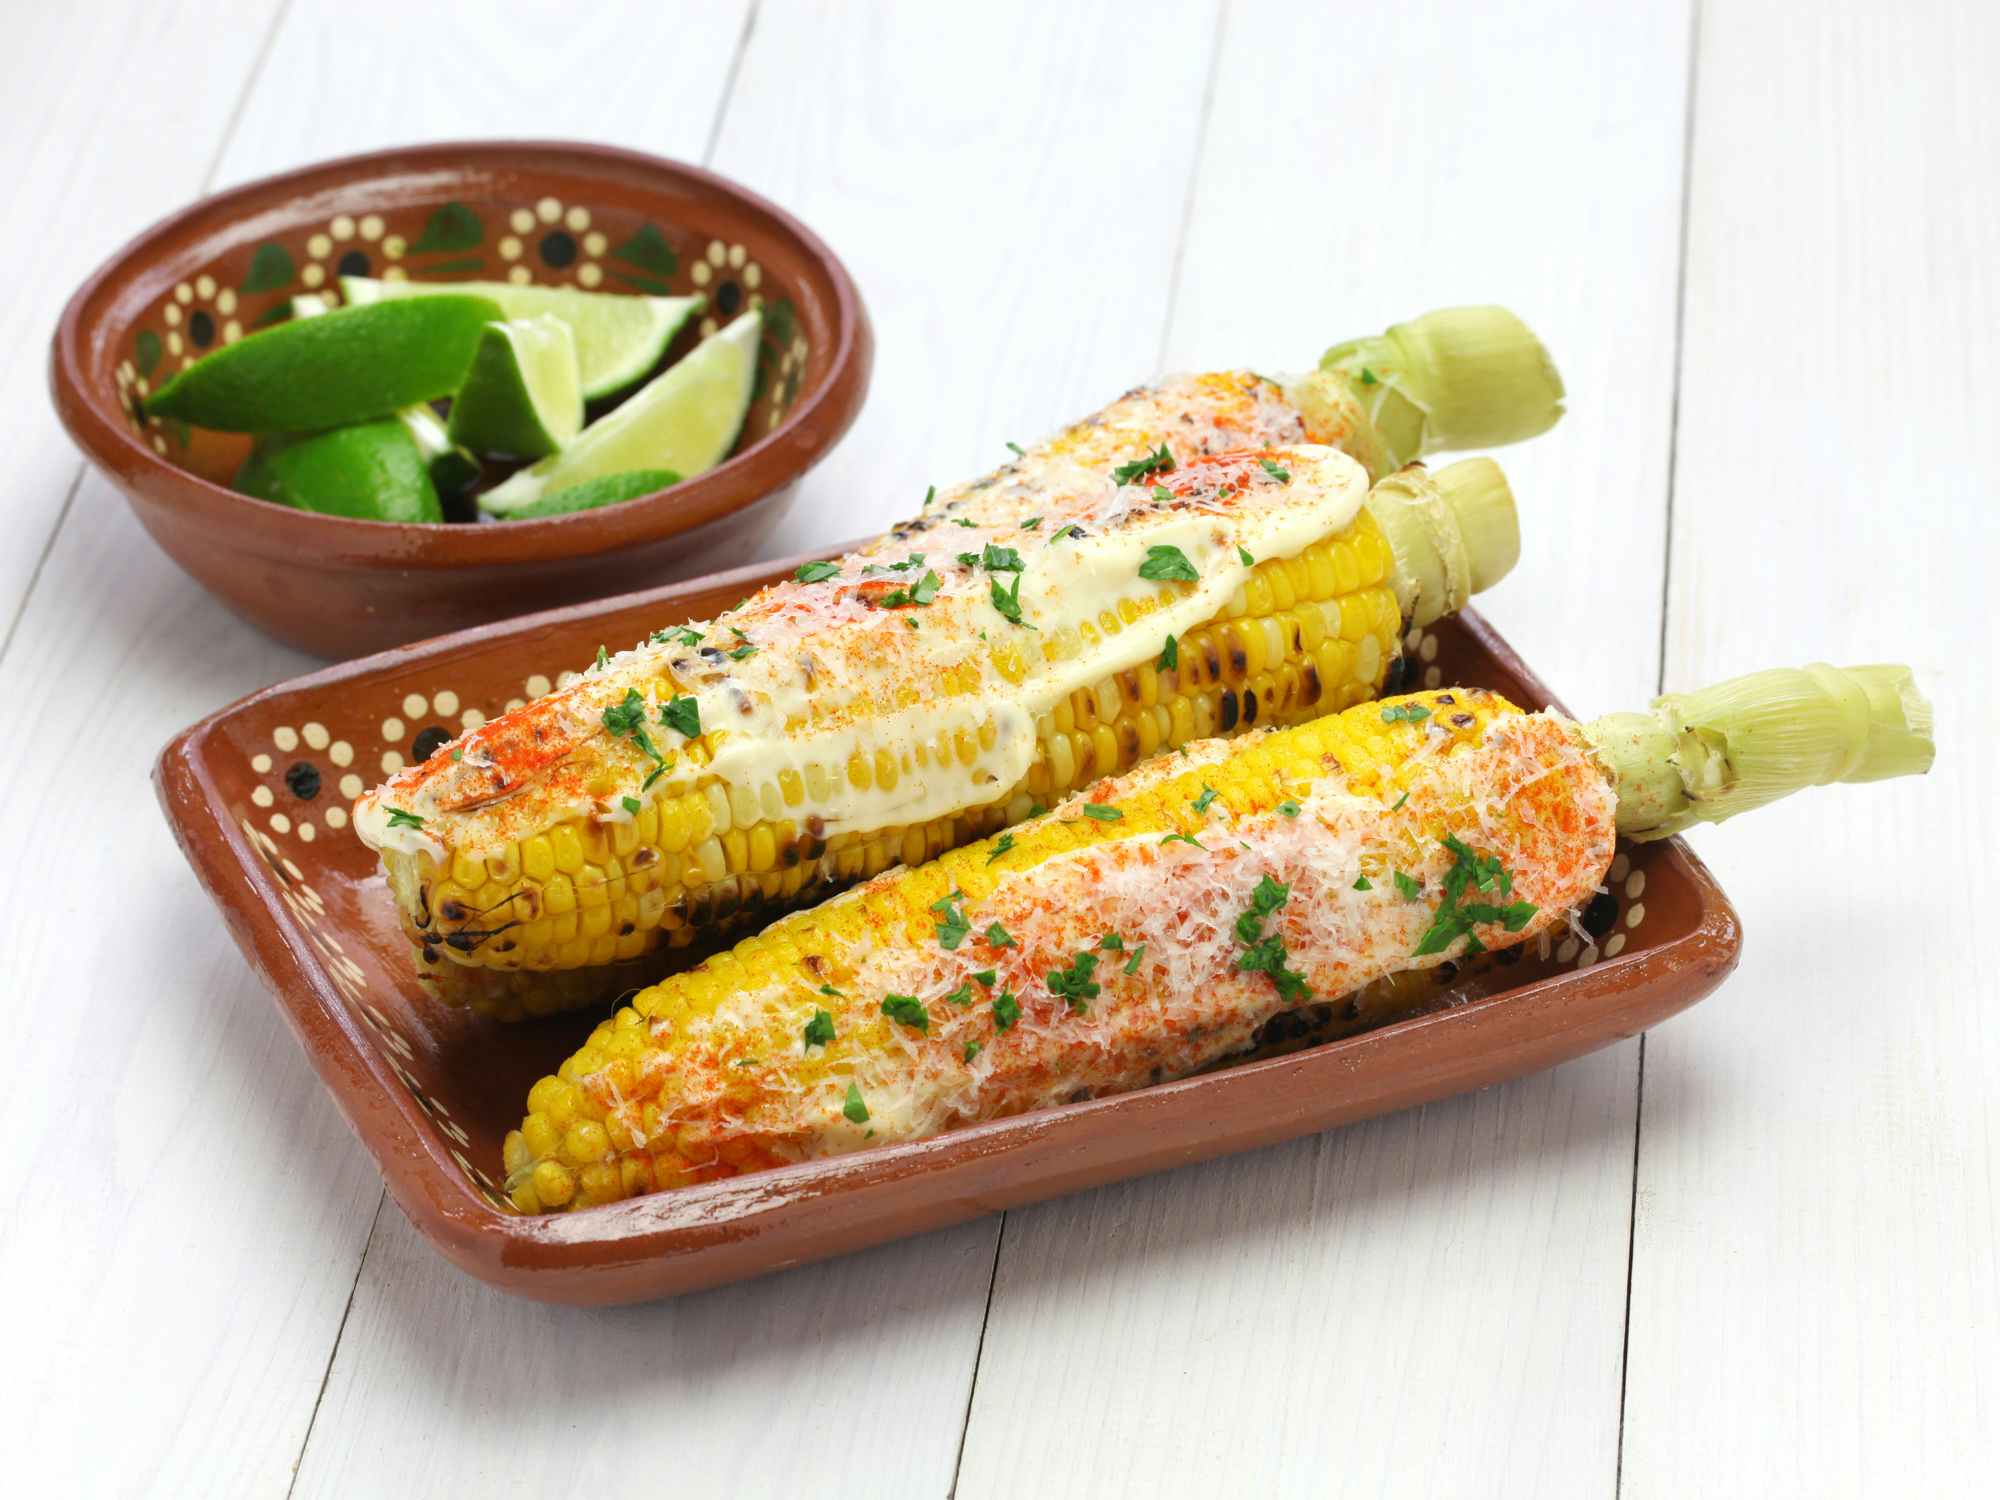 Some grilled elote corn with lime sauce